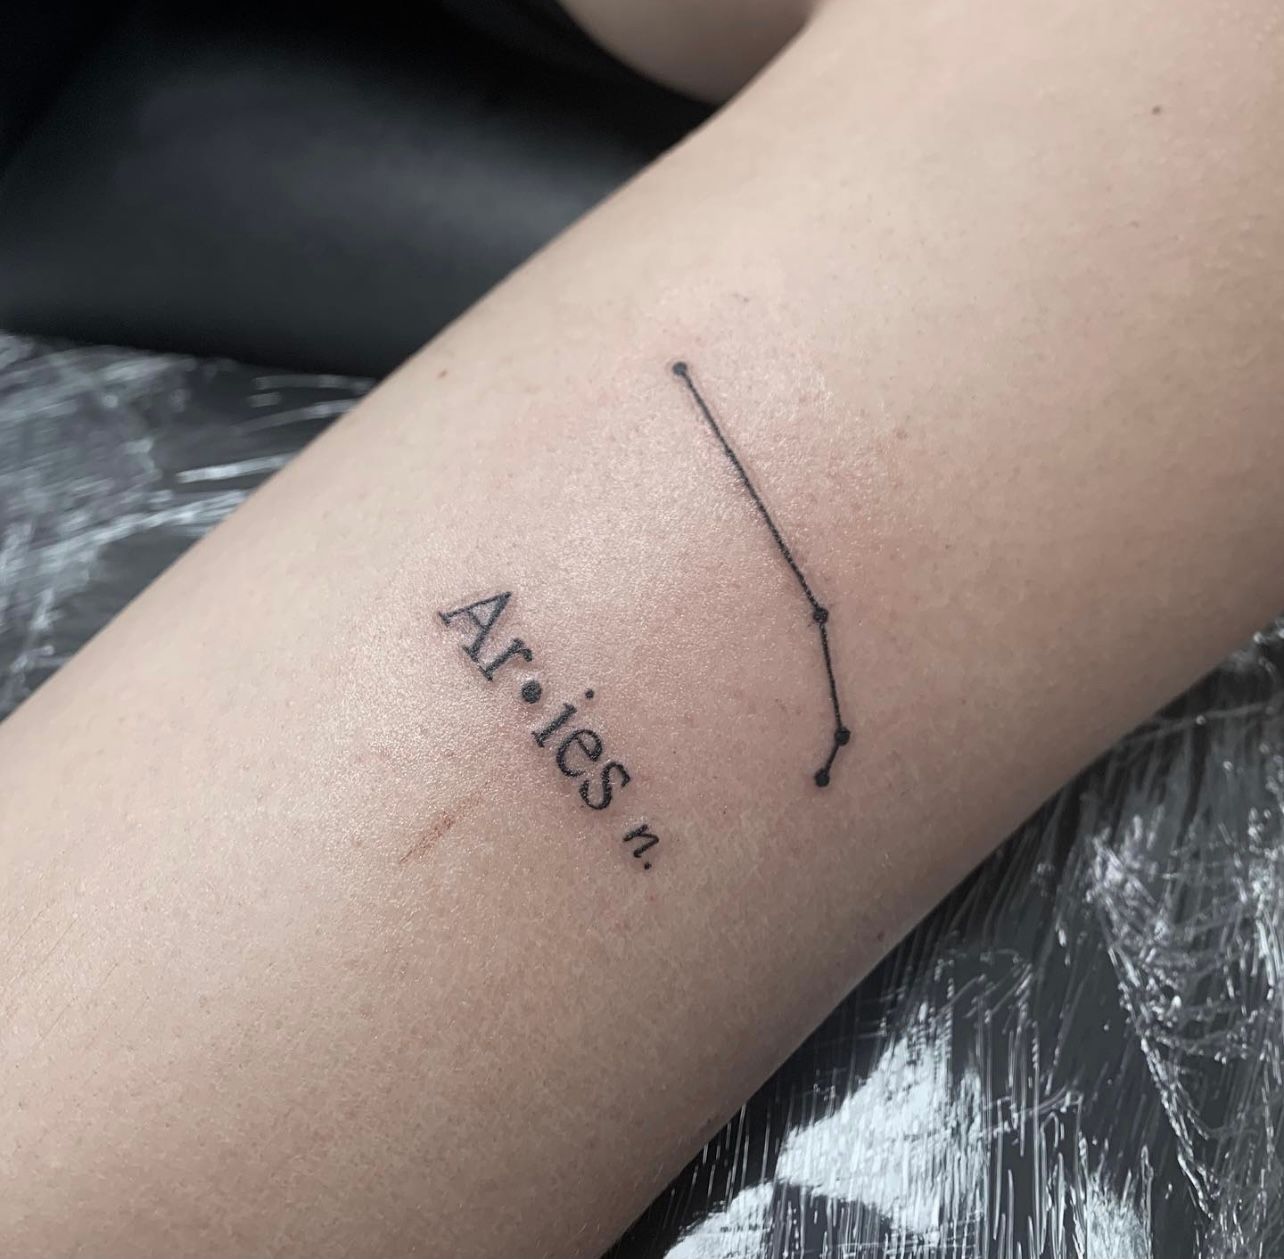 Aries constellation tattoo forming the word SEA